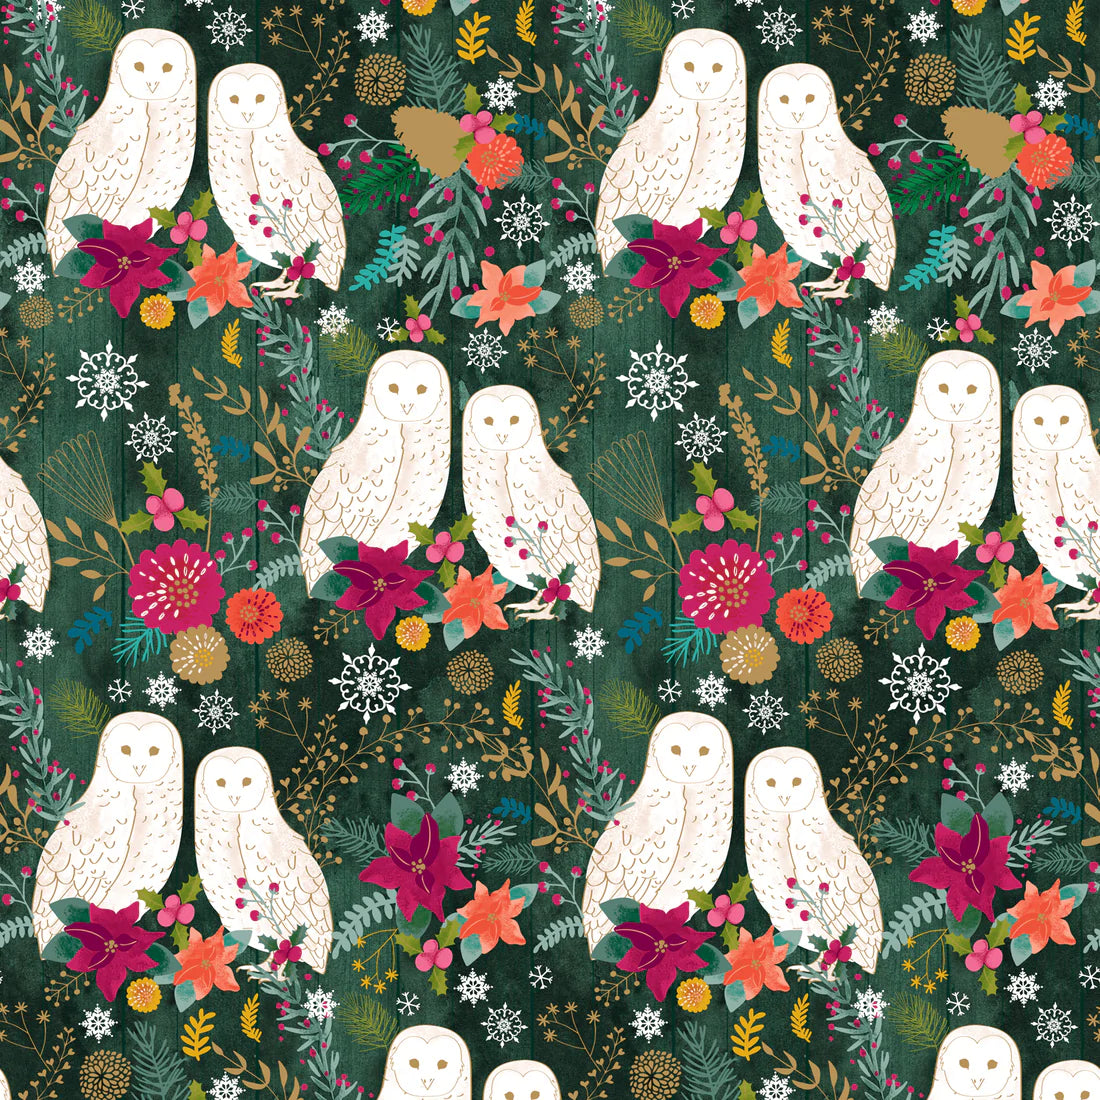 Snow Owls Christmas Wrapping Paper Roll